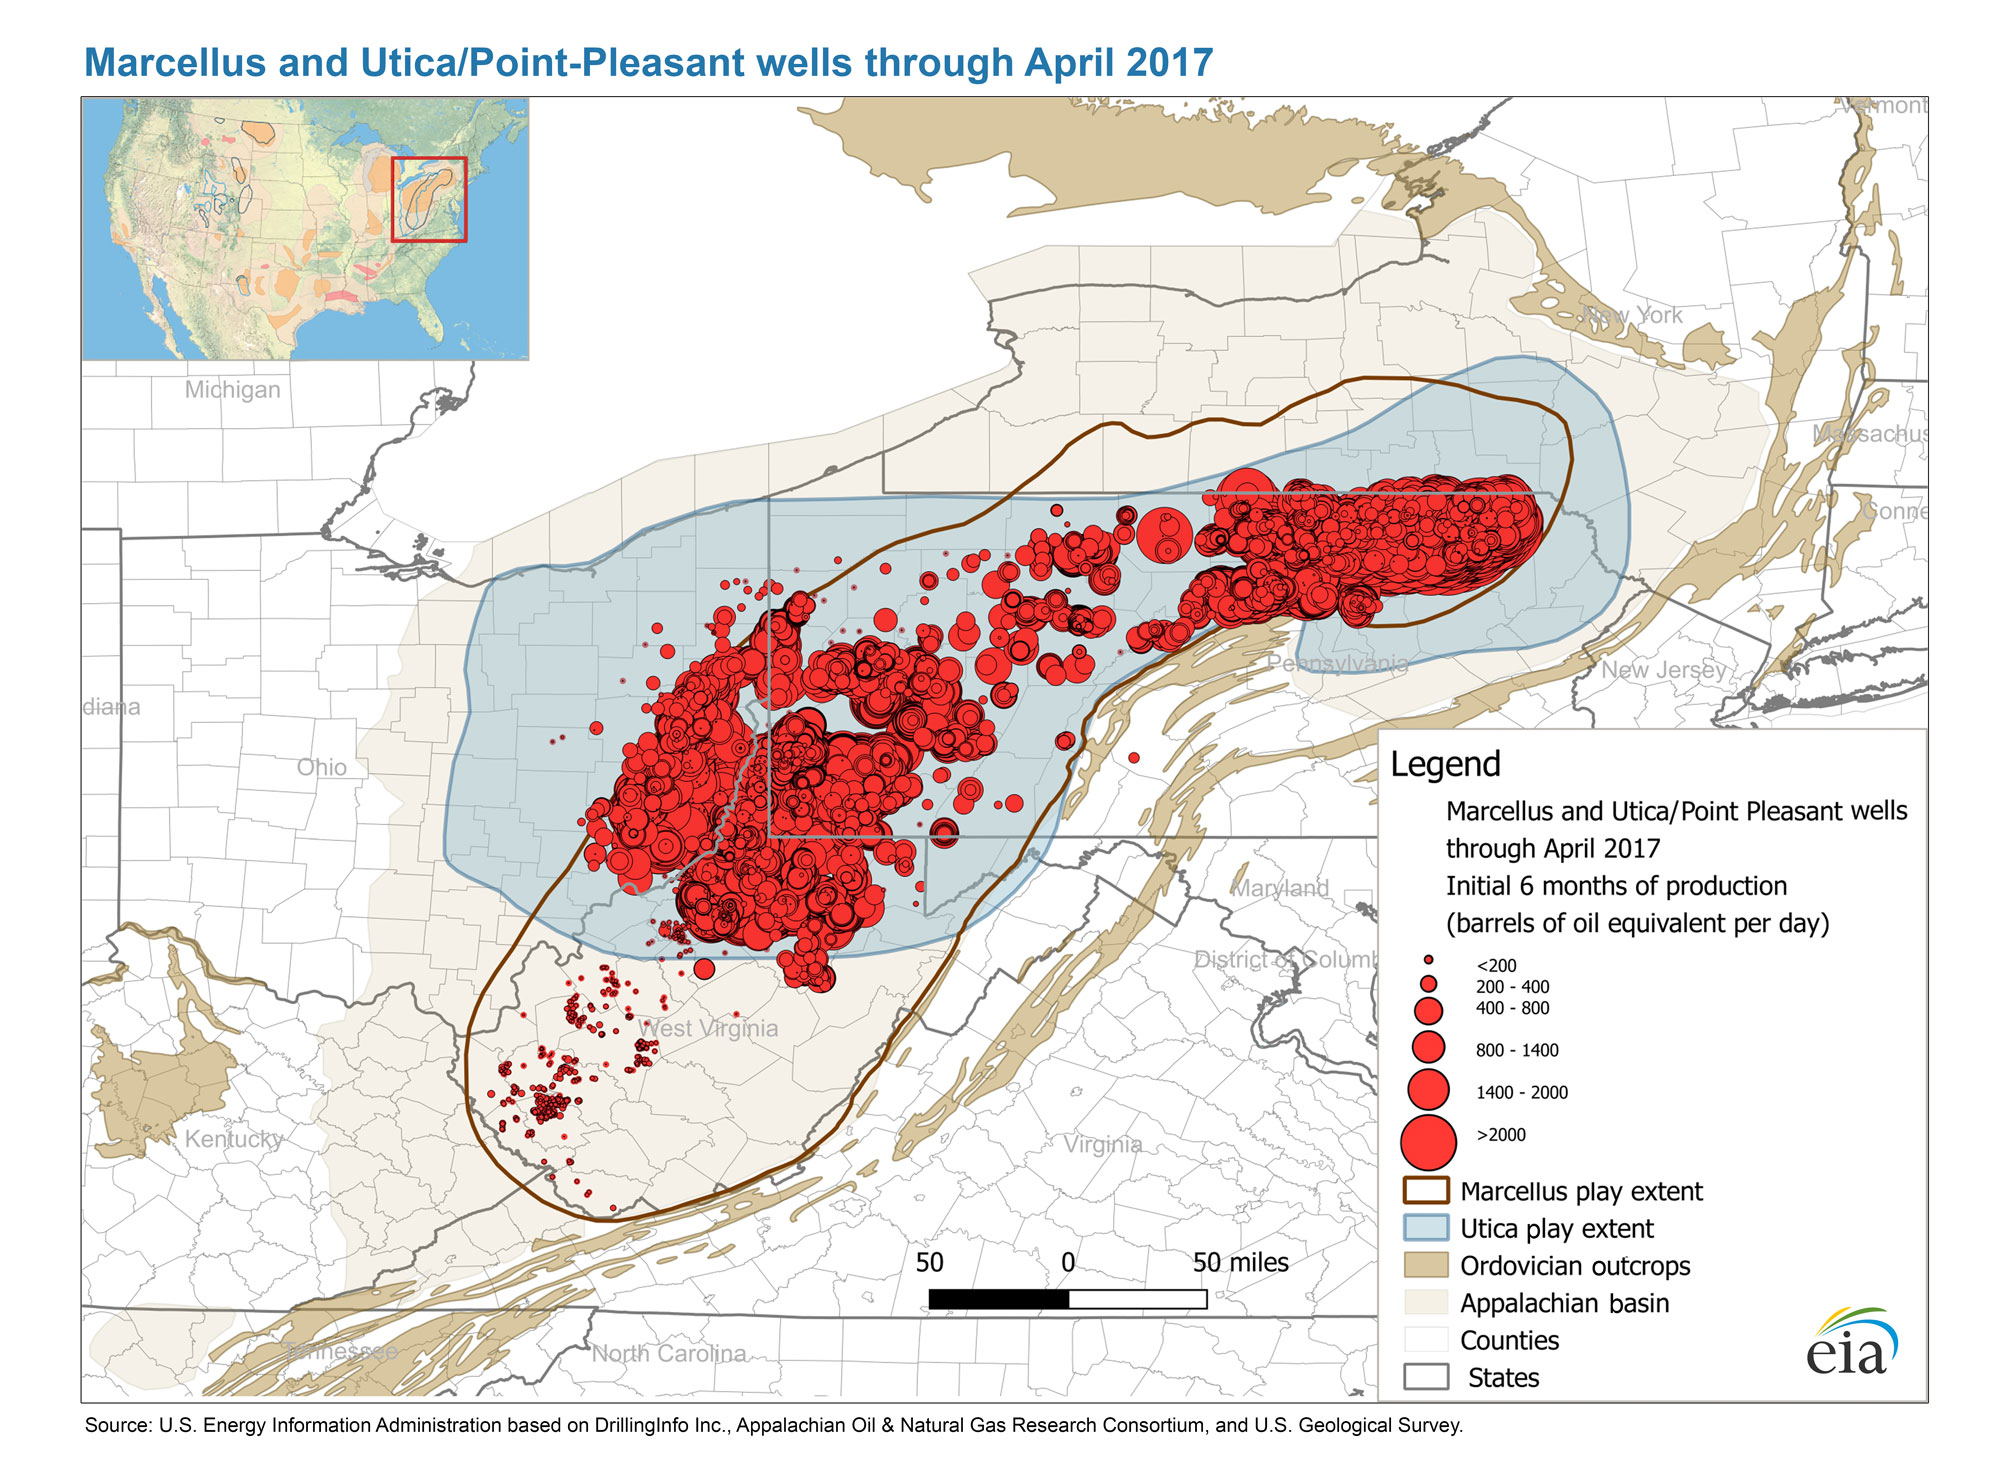 Distribution of Marcellus Shale and Utica-Point Pleasant shale deposits, petroleum plays, and petroleum wells.